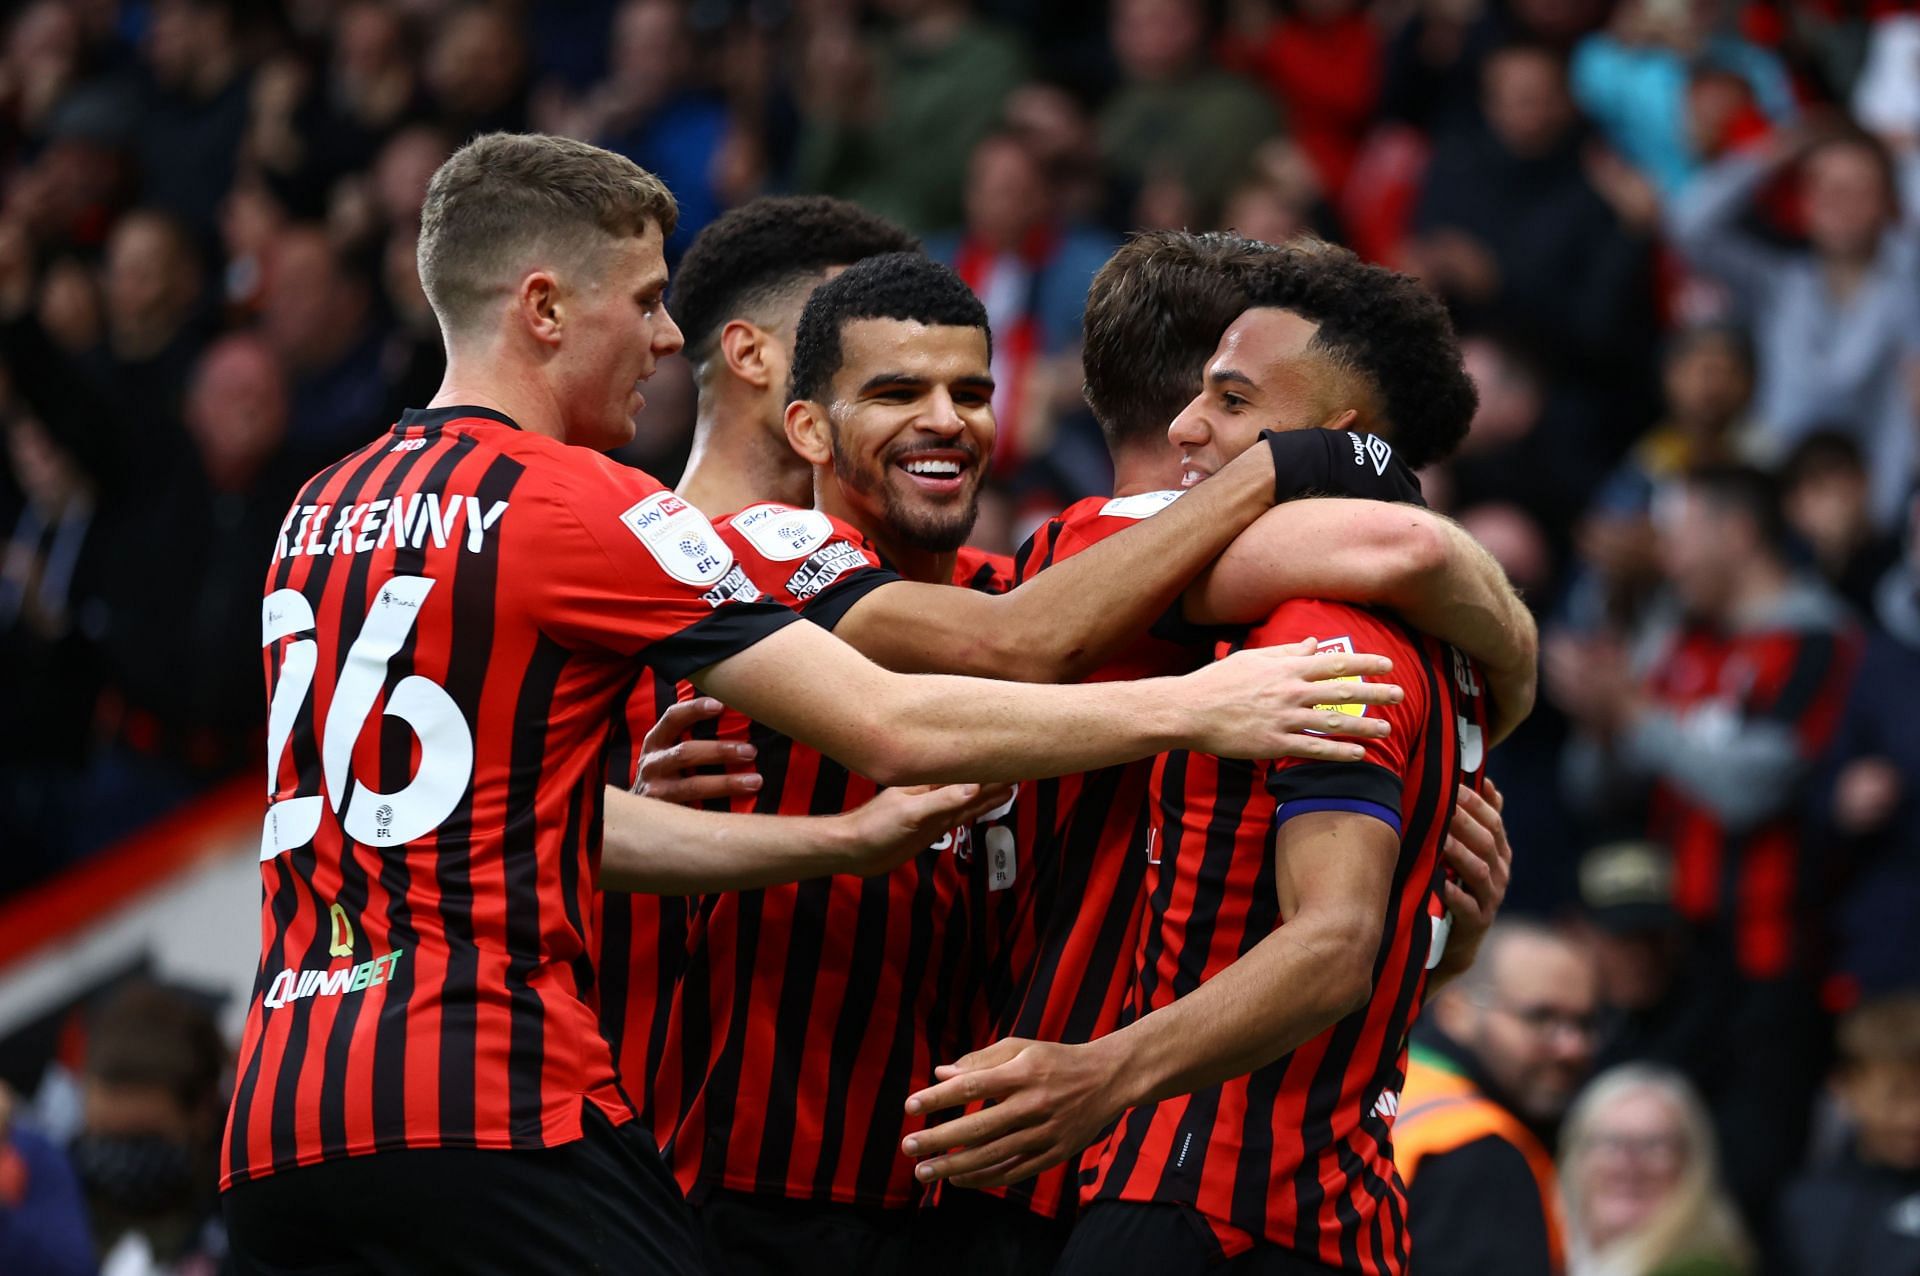 AFC Bournemouth will face Reading on Saturday